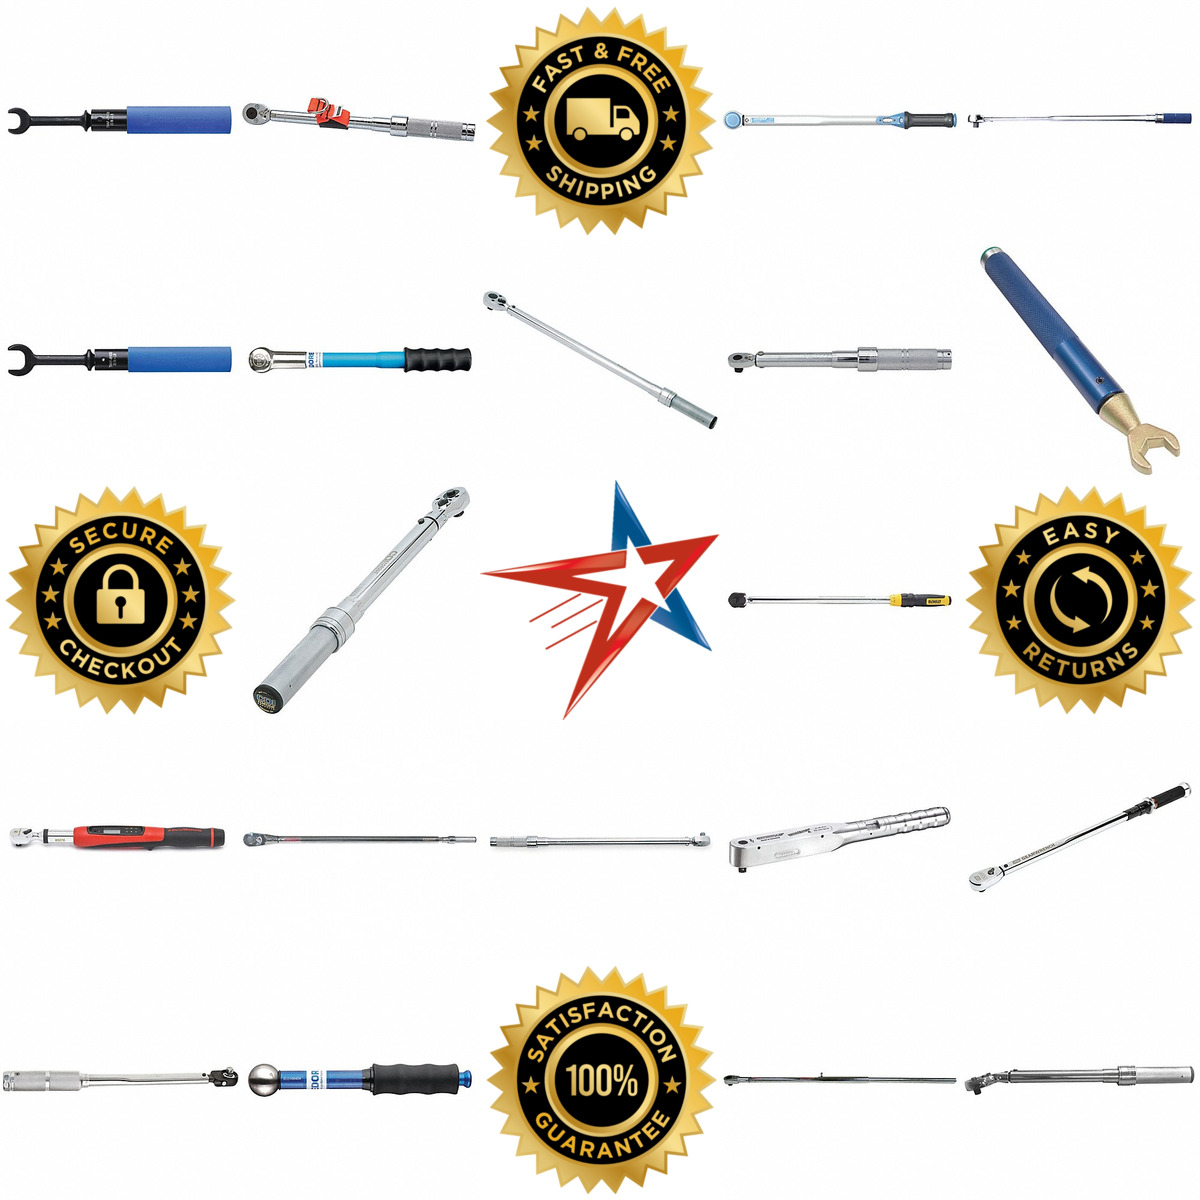 A selection of Micrometer Torque Wrenches products on GoVets